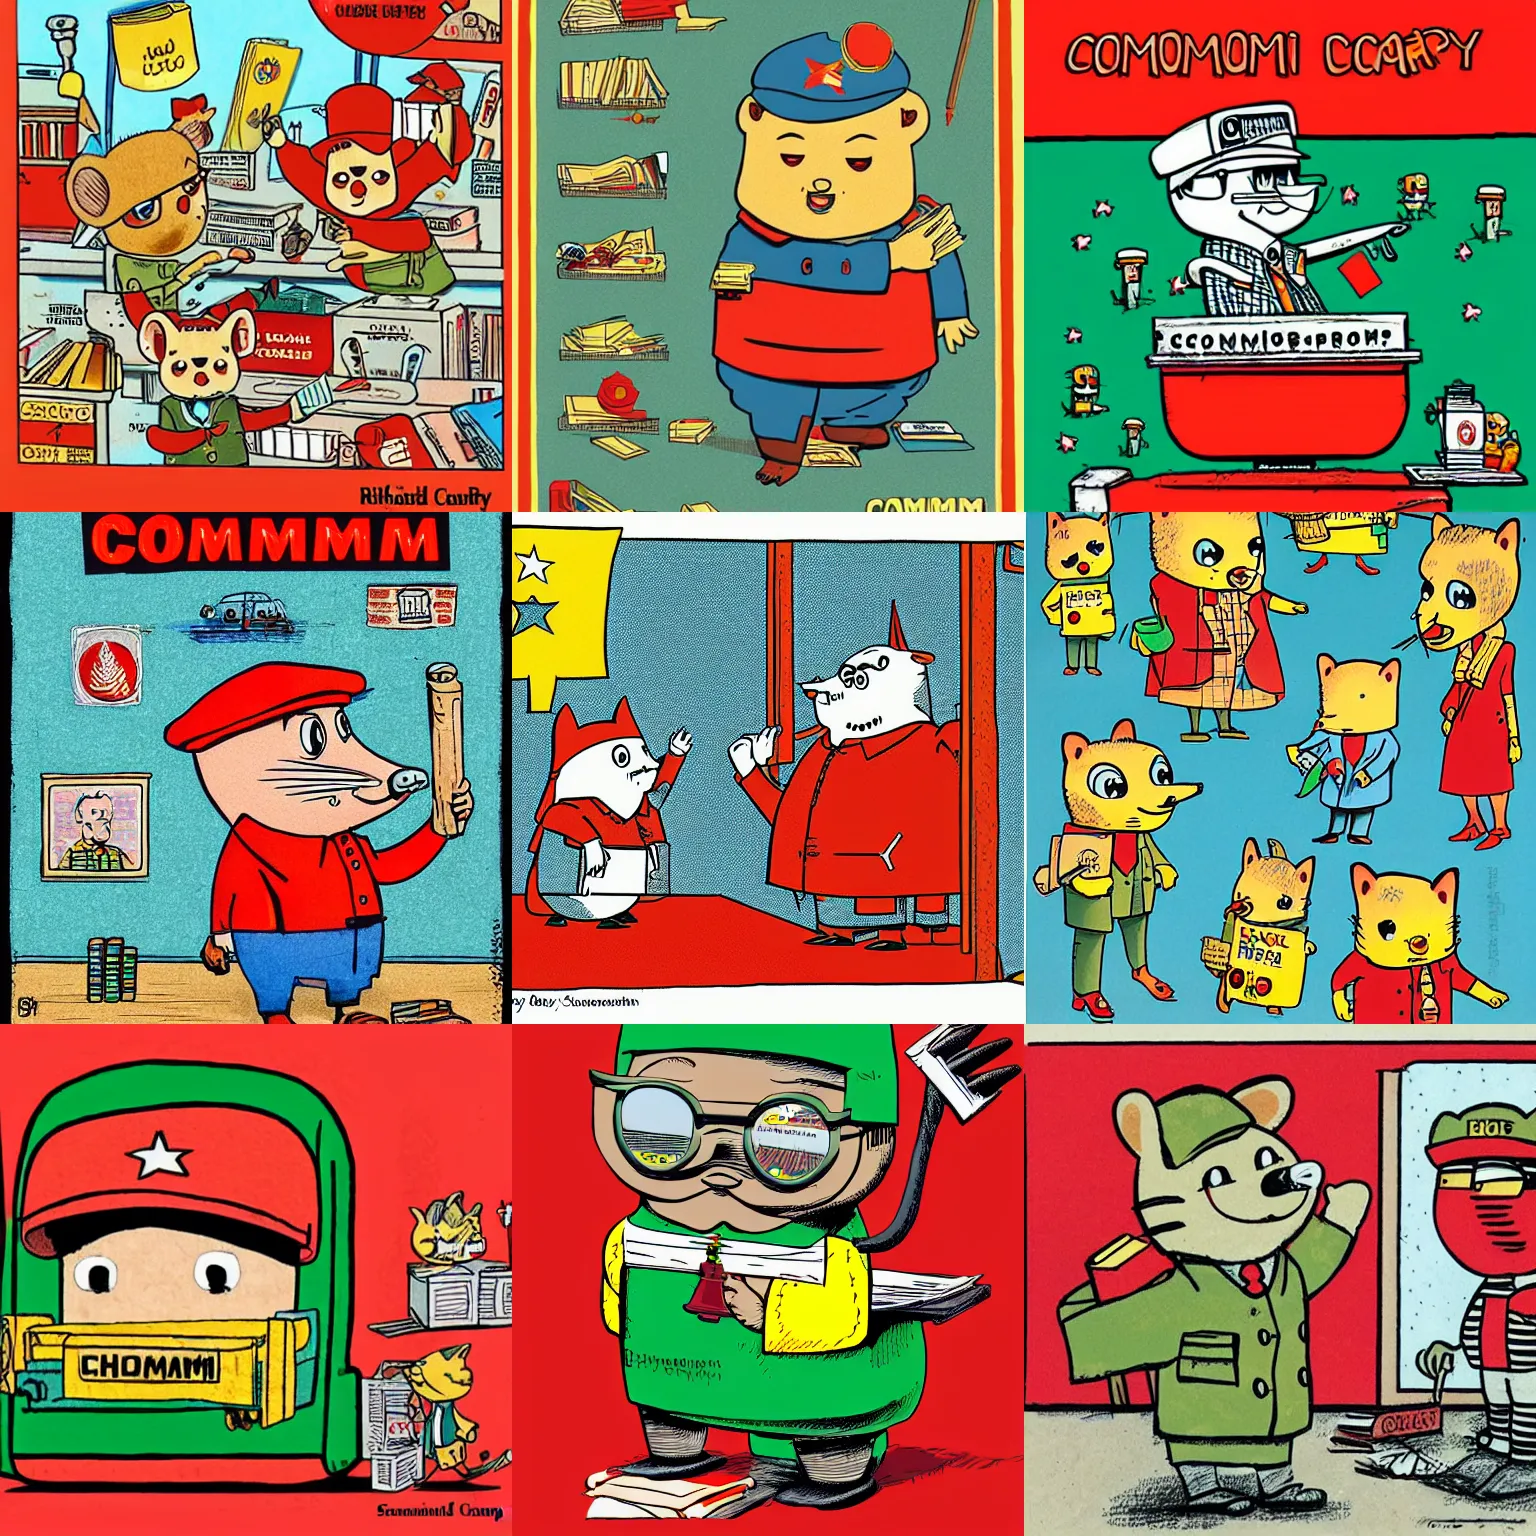 Prompt: communism by richard scarry